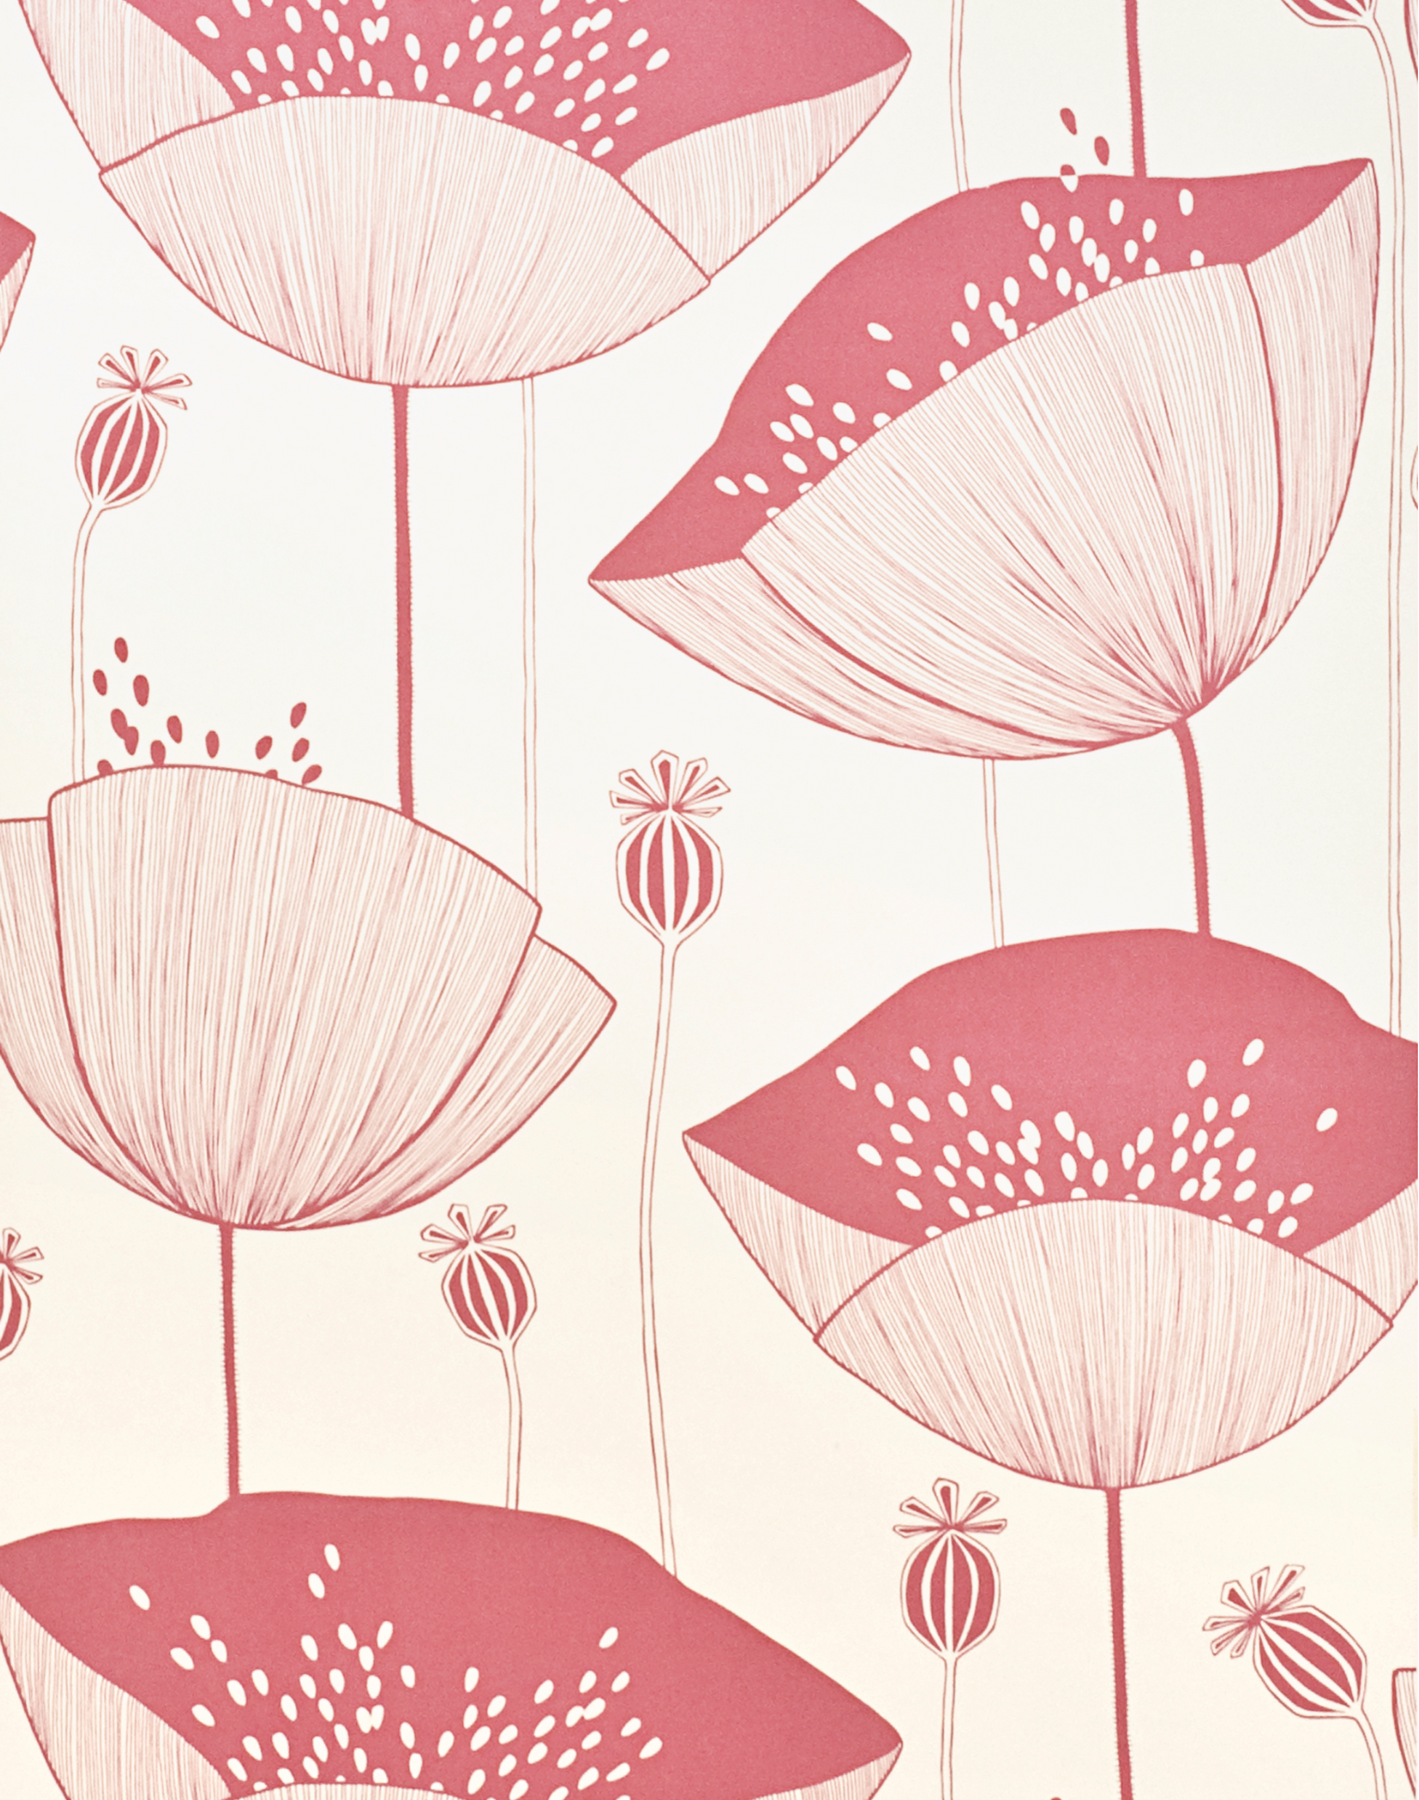 Blush Pink Floral Background Texture Graphic by Peppy Poppy Panda